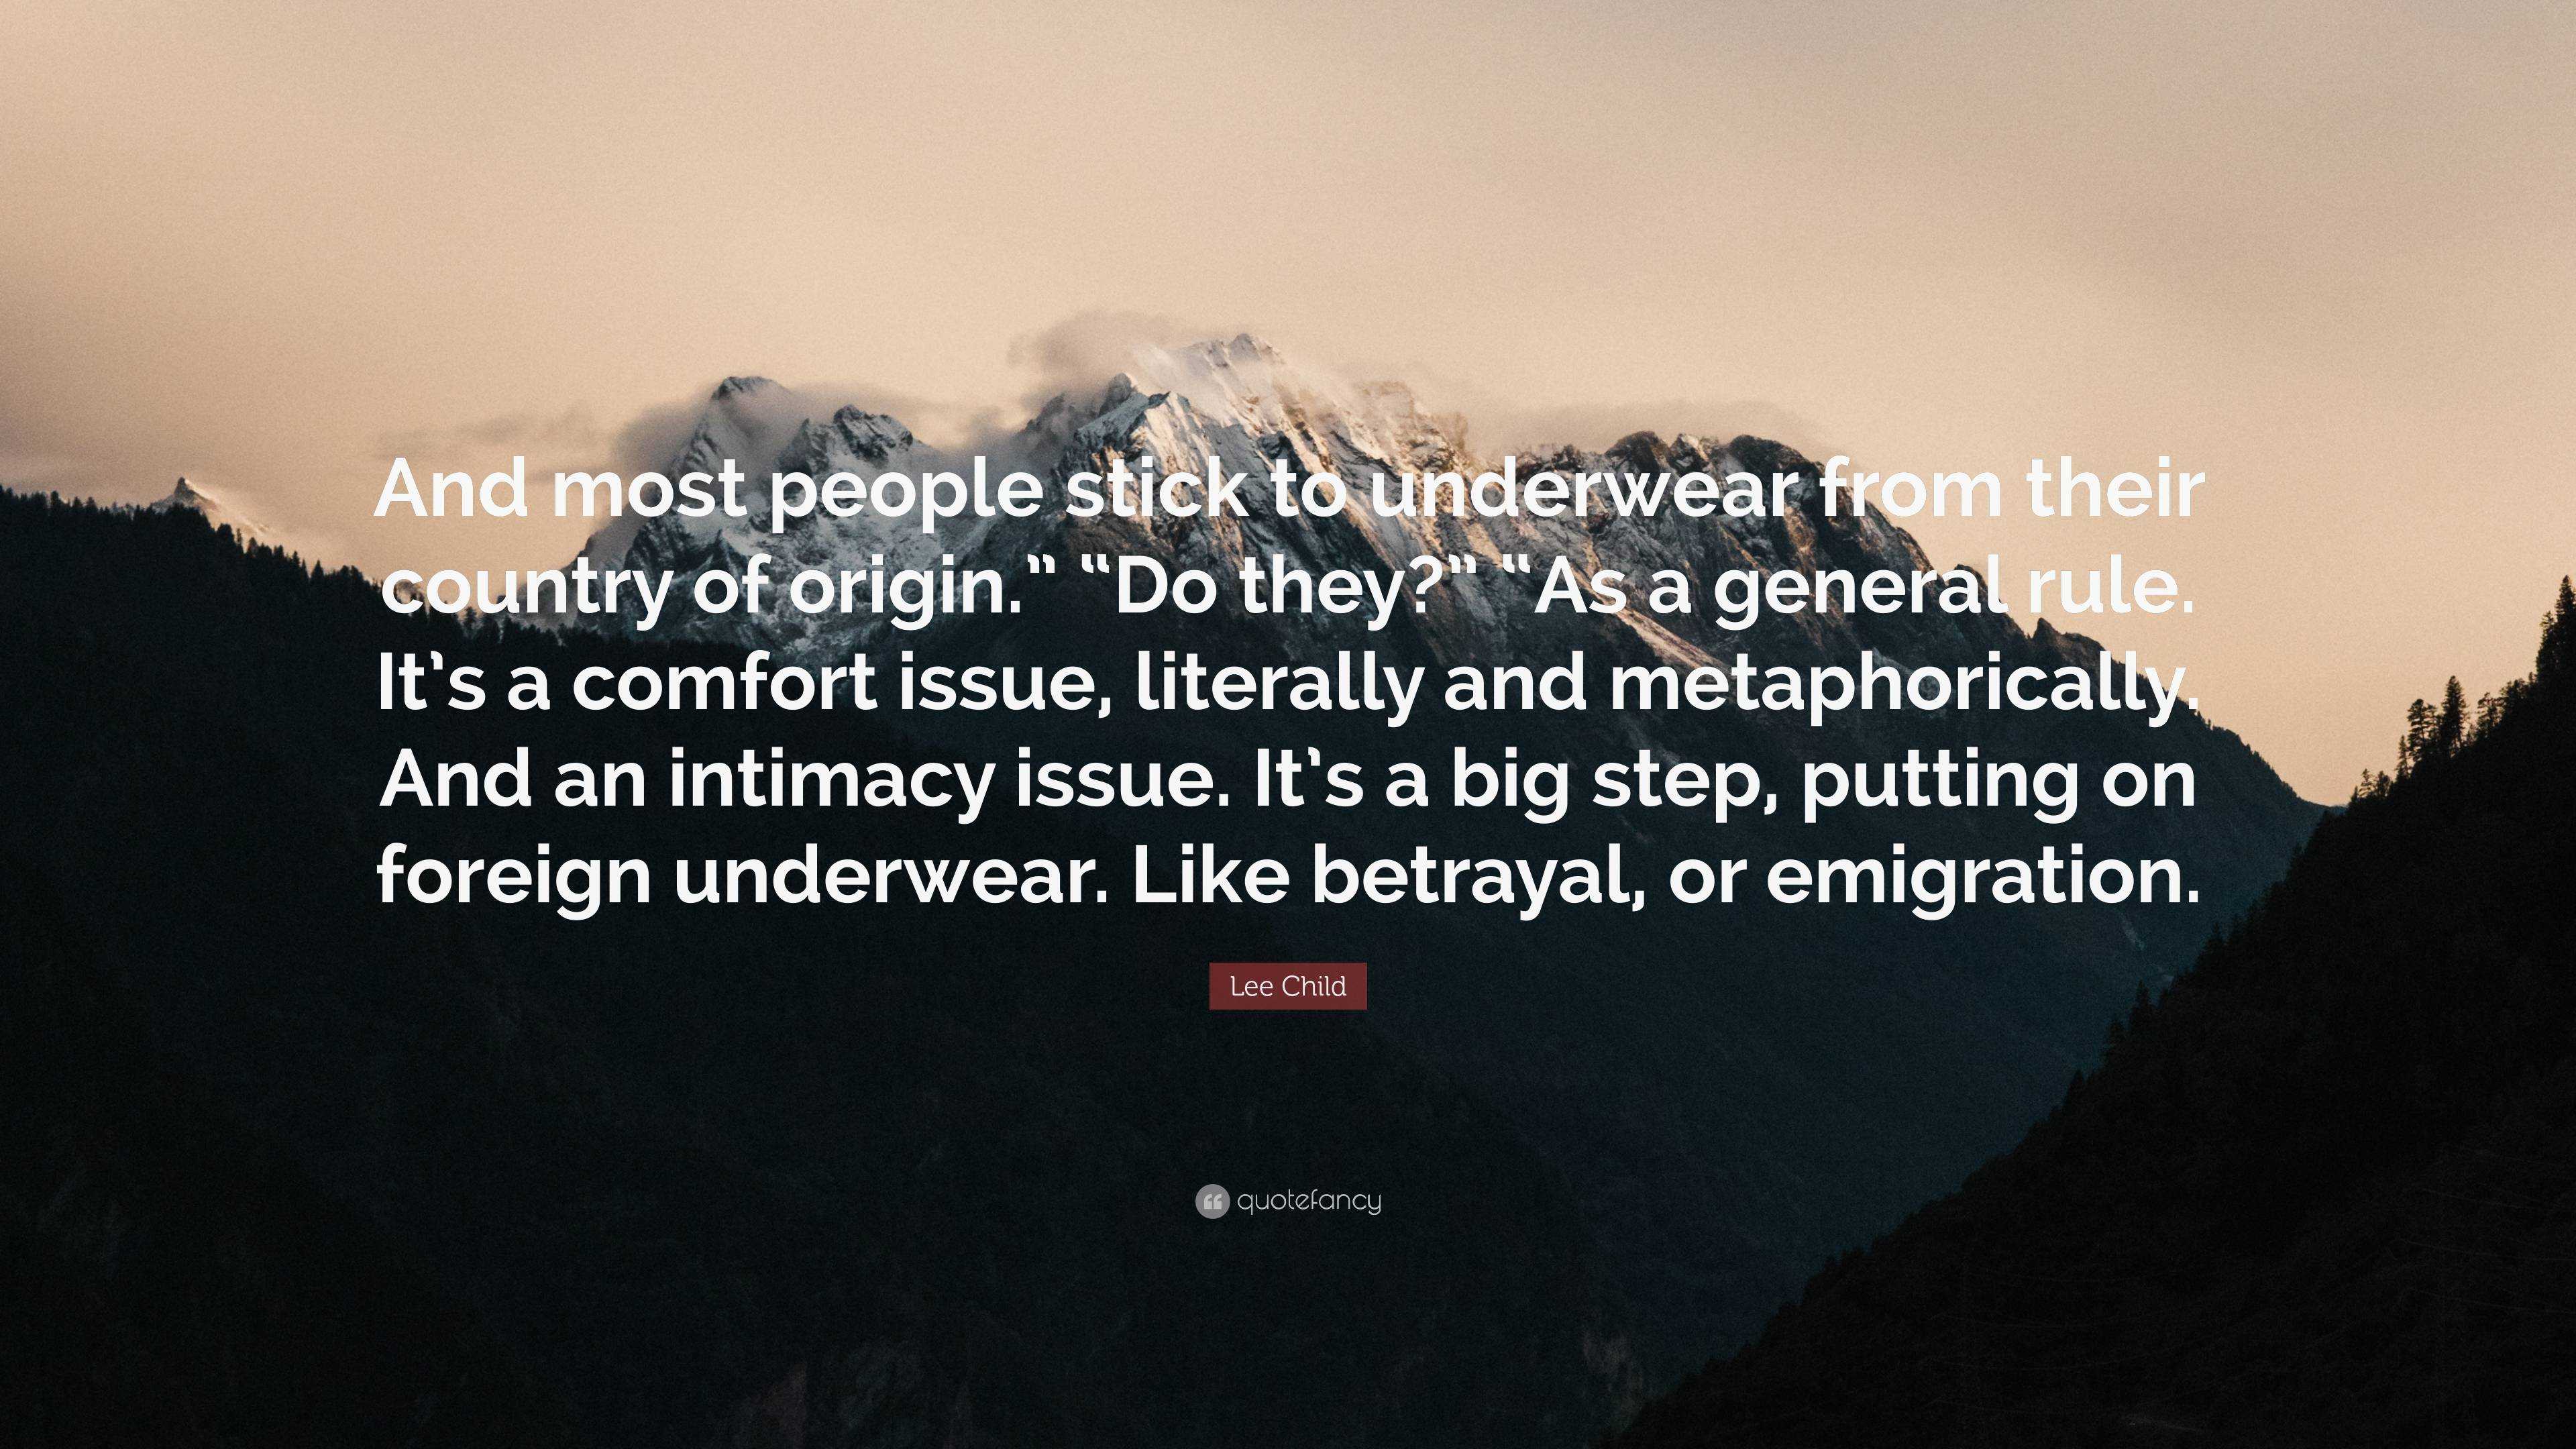 Lee Child Quote: “And most people stick to underwear from their